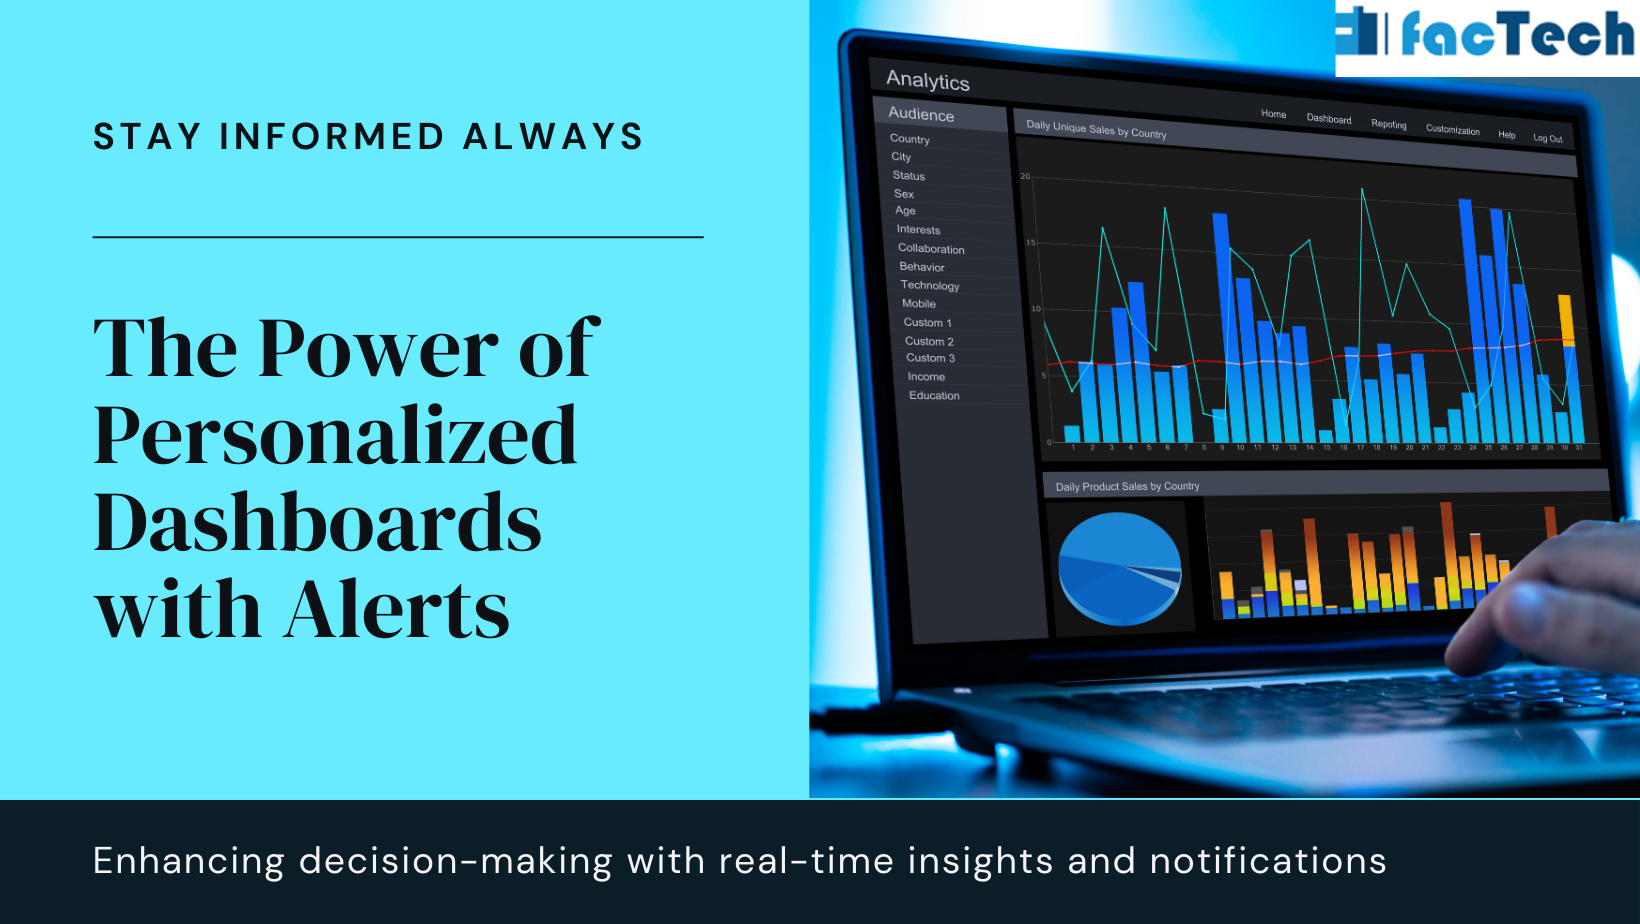 The Power of Personalized Dashboards with Alerts